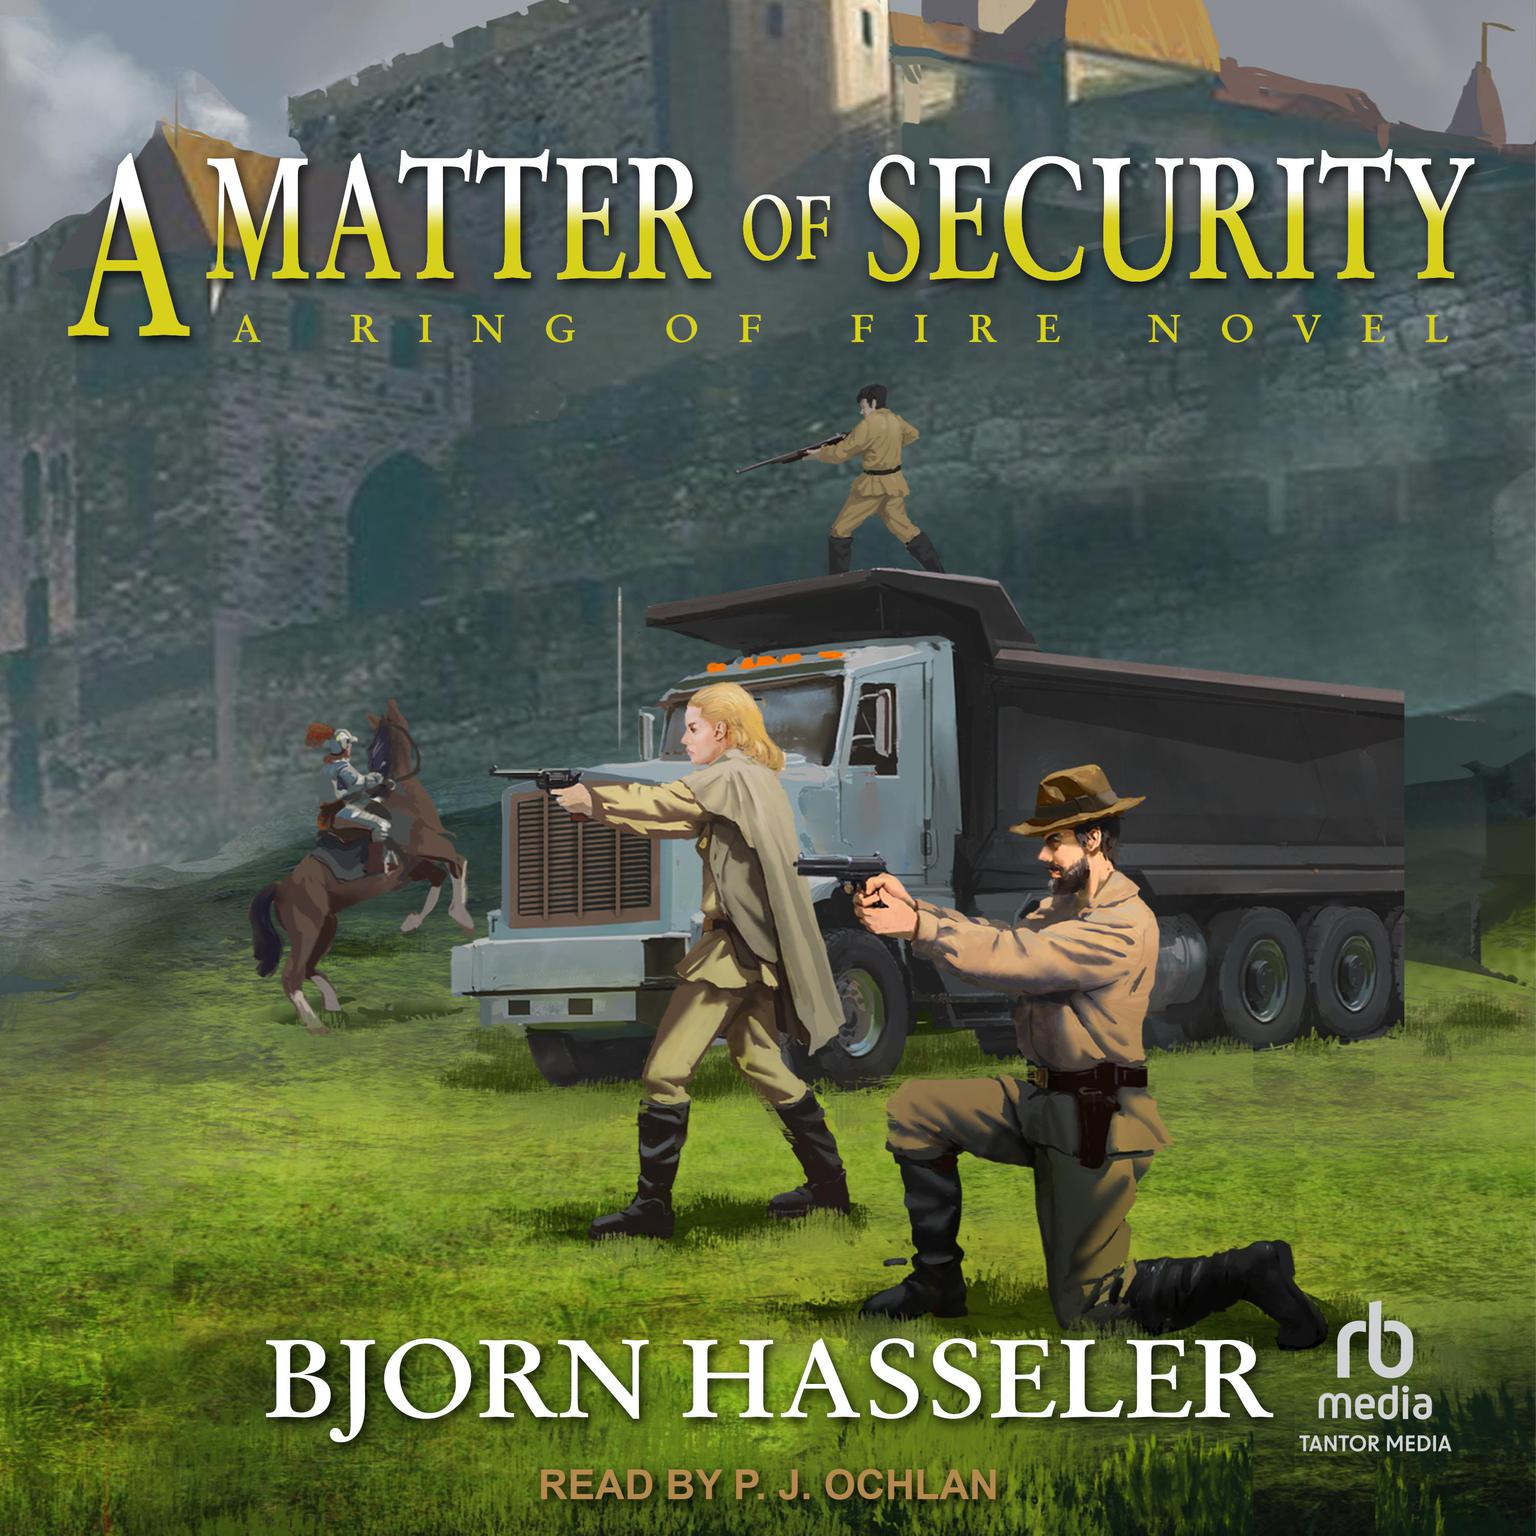 A Matter of Security: A Ring of Fire Novel Audiobook, by Bjorn Hasseler